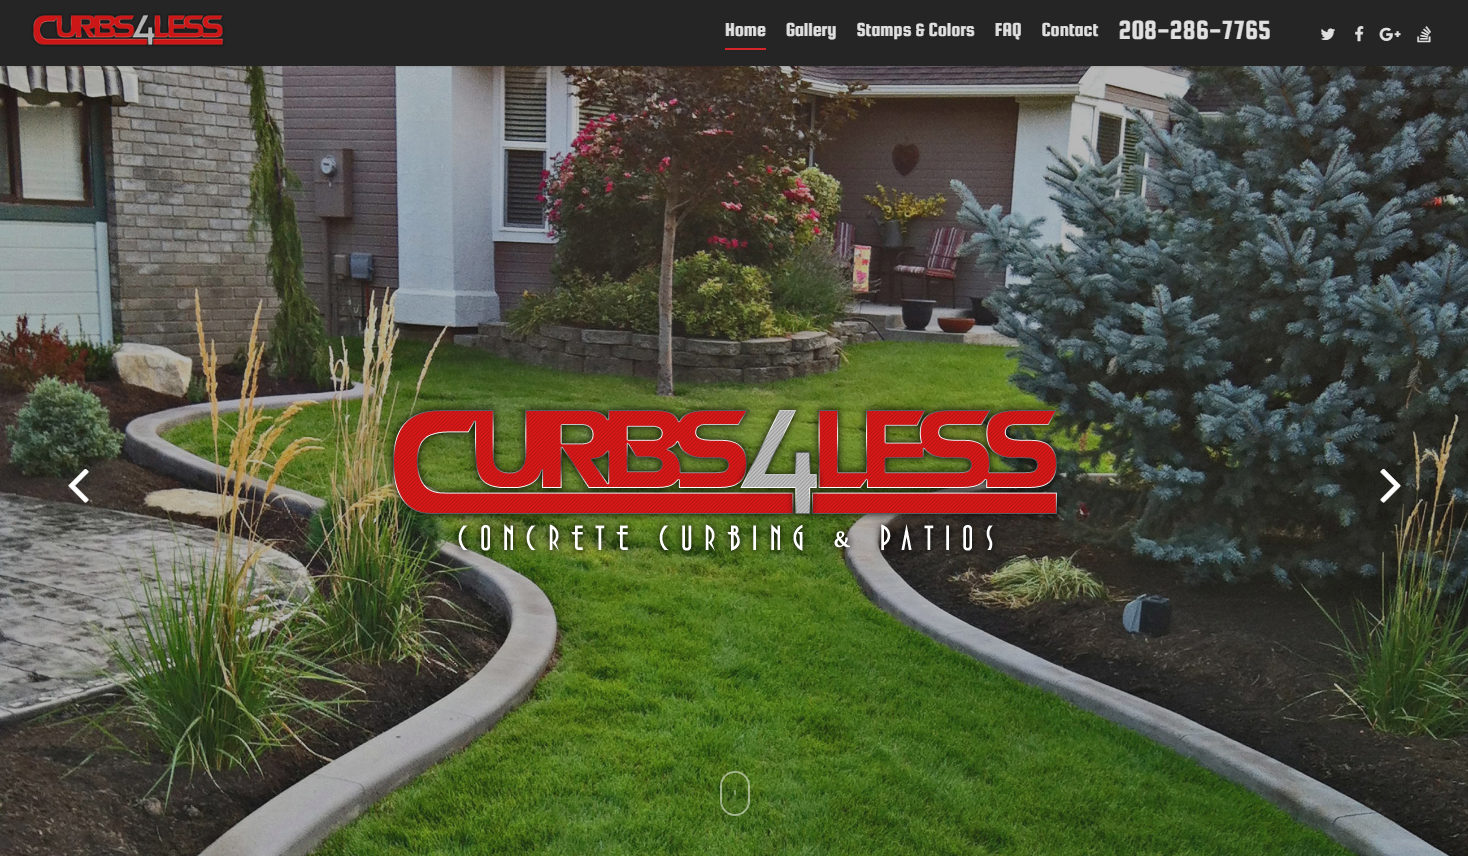 New Boise Website at Curbs 4 Less